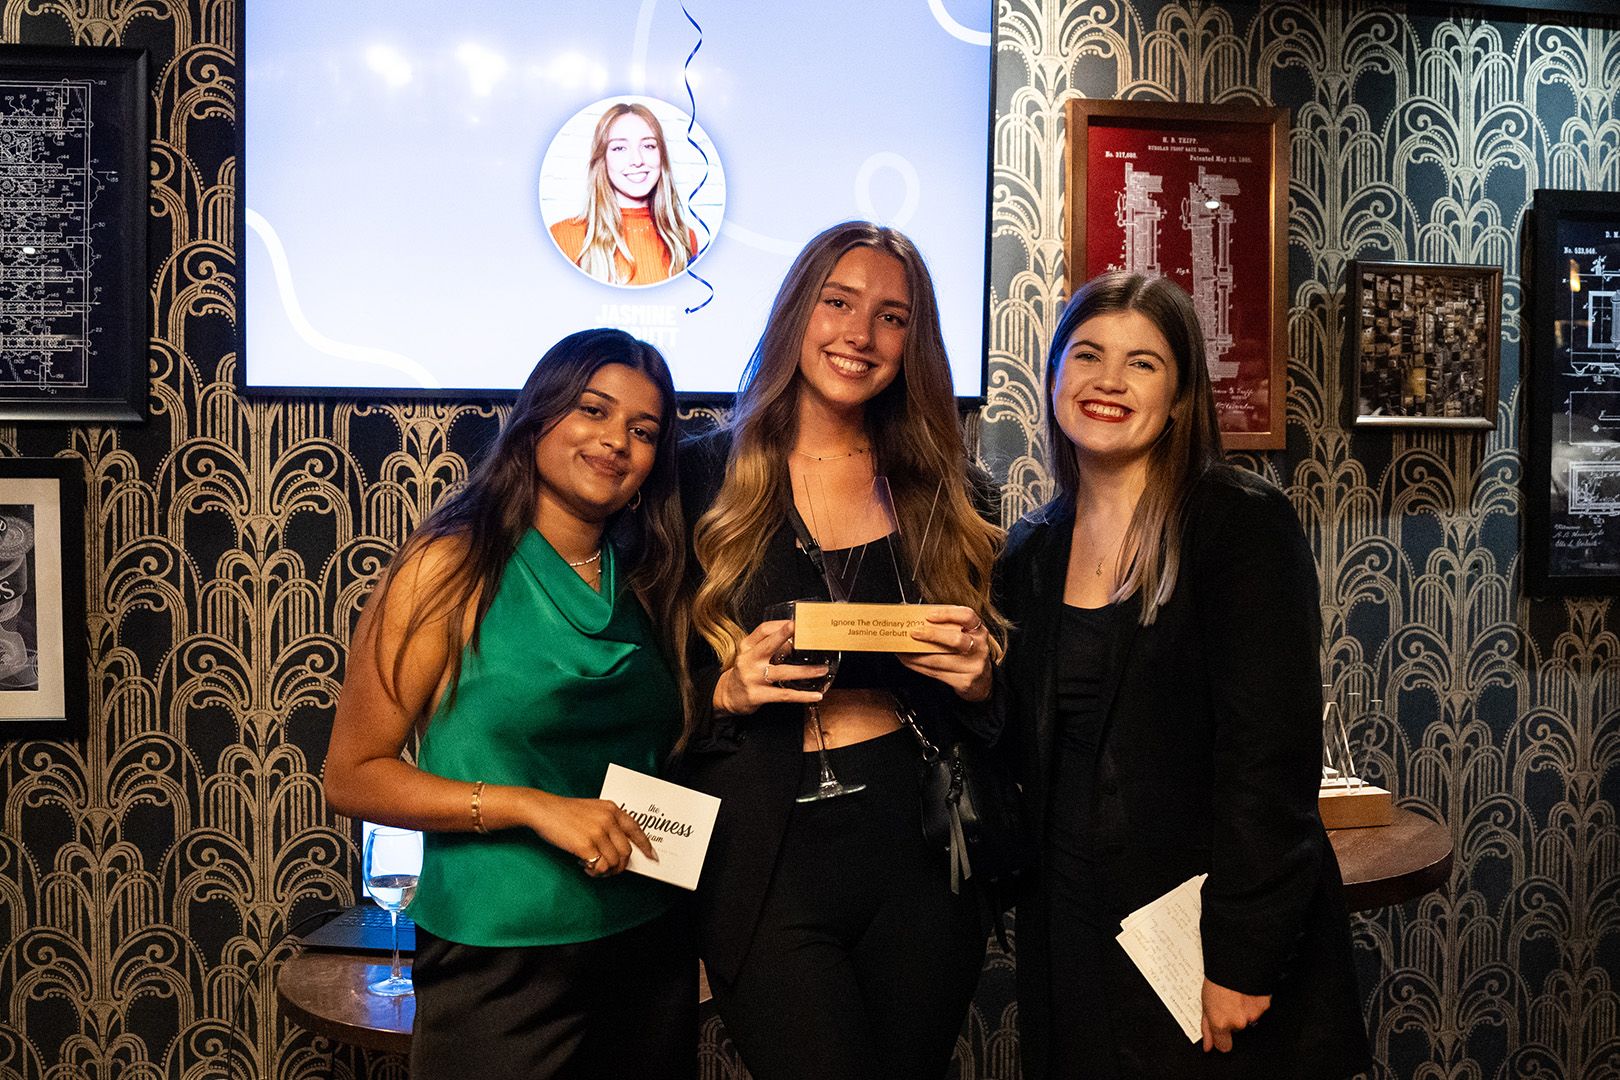 Image of three women celebrating at an awards event